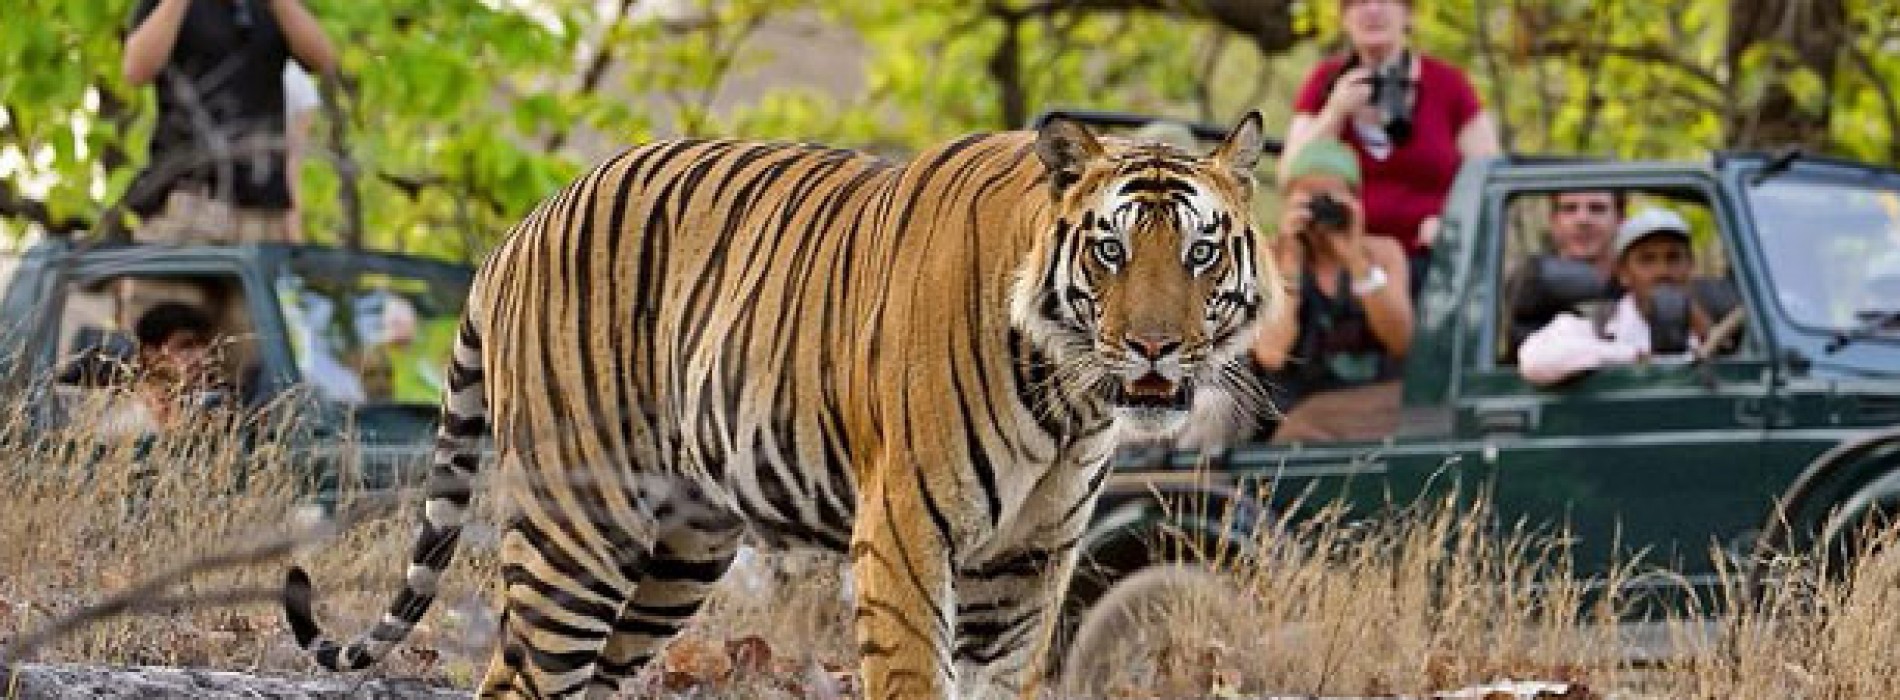 Tiger Census in Ranthambore National Park